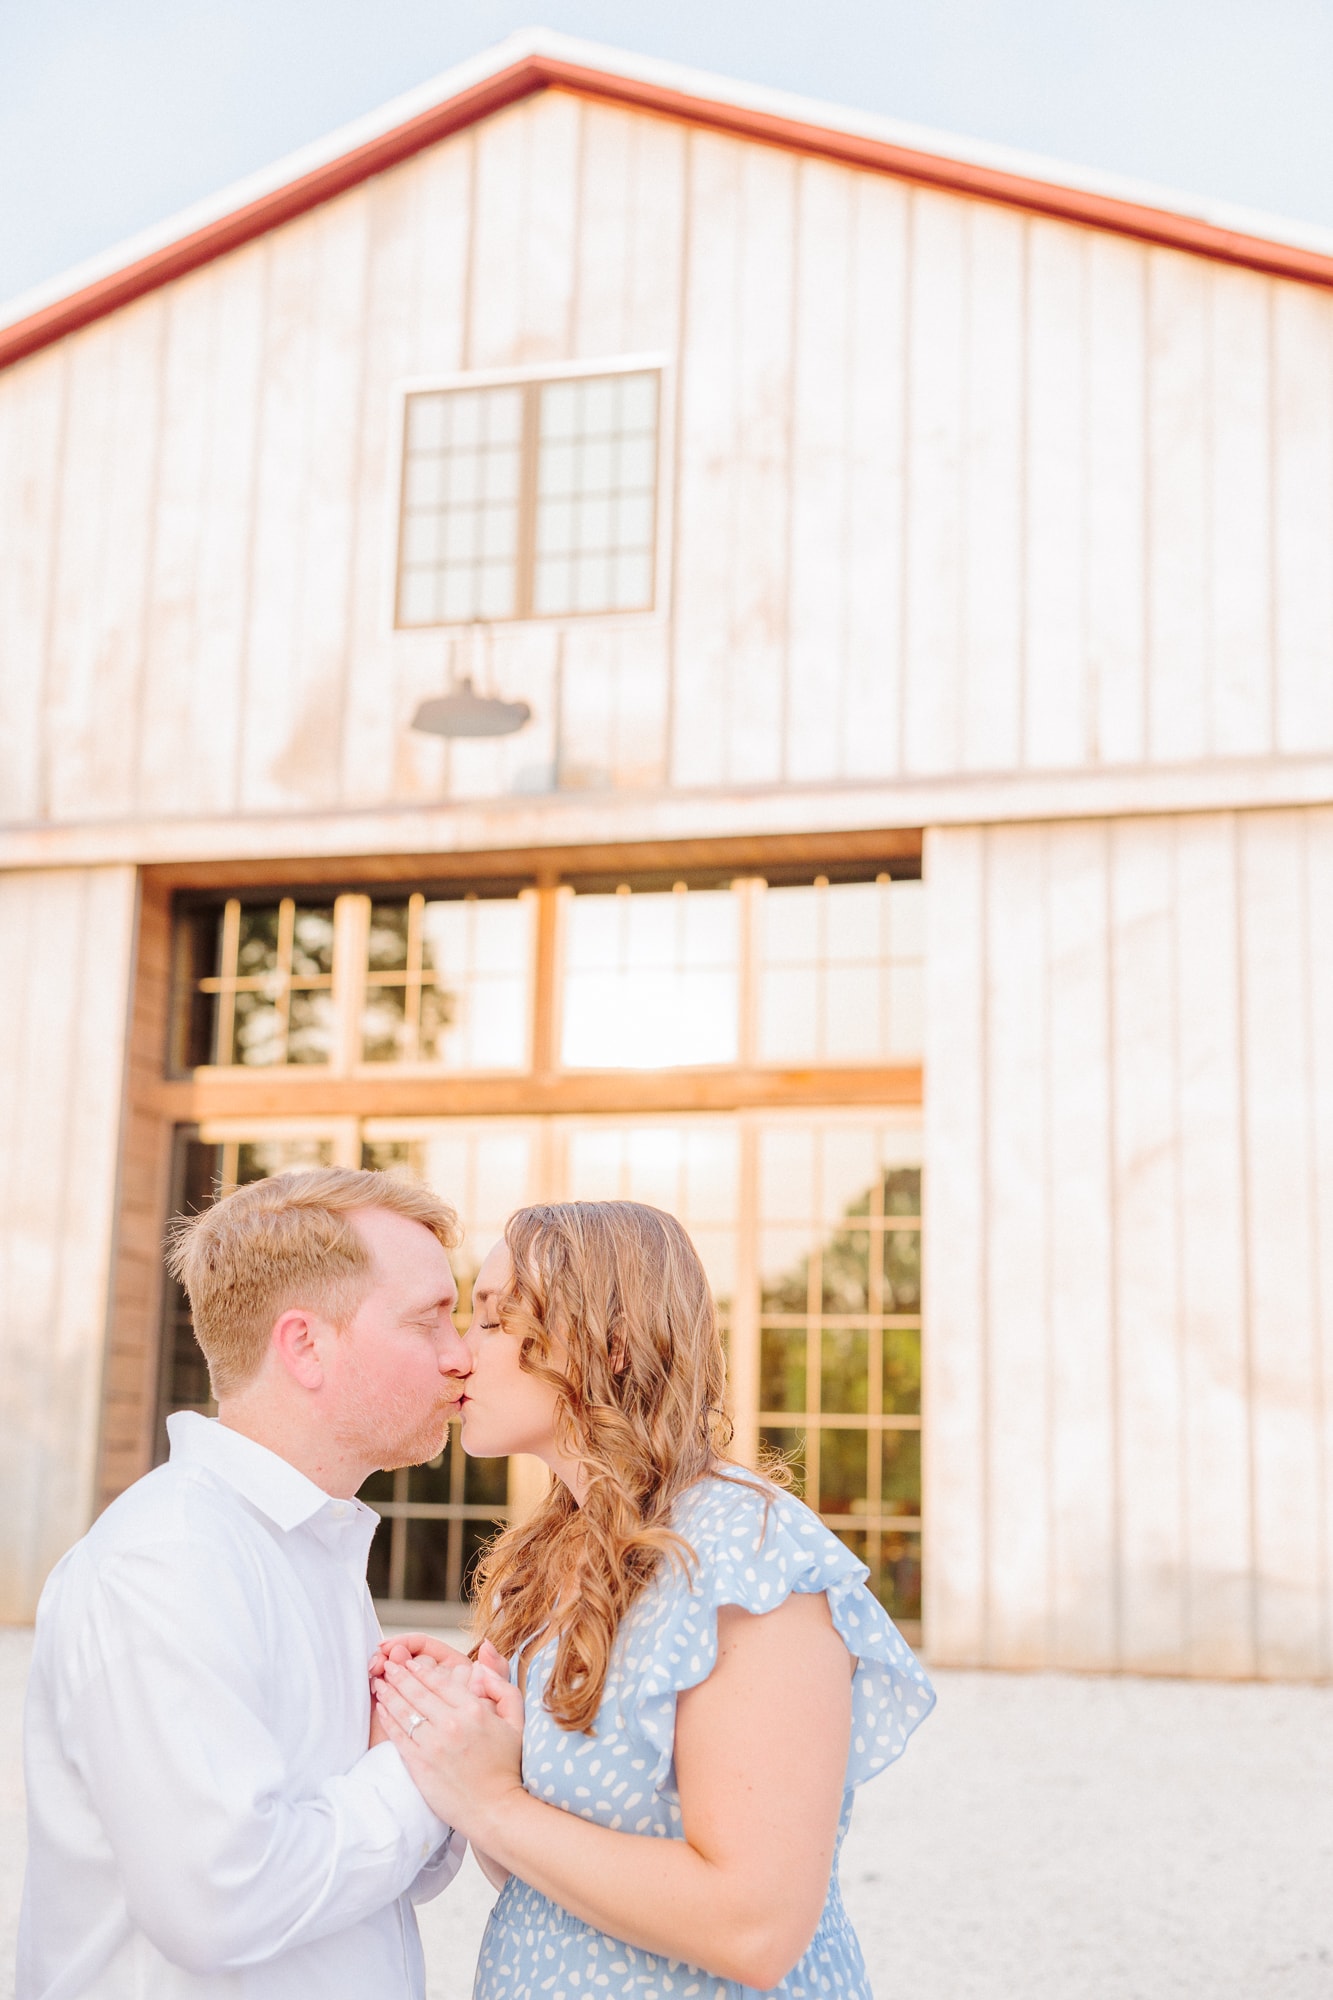 A touch of rustic elegance graces Laura and Aaron's engagement session at North Corner Haven.